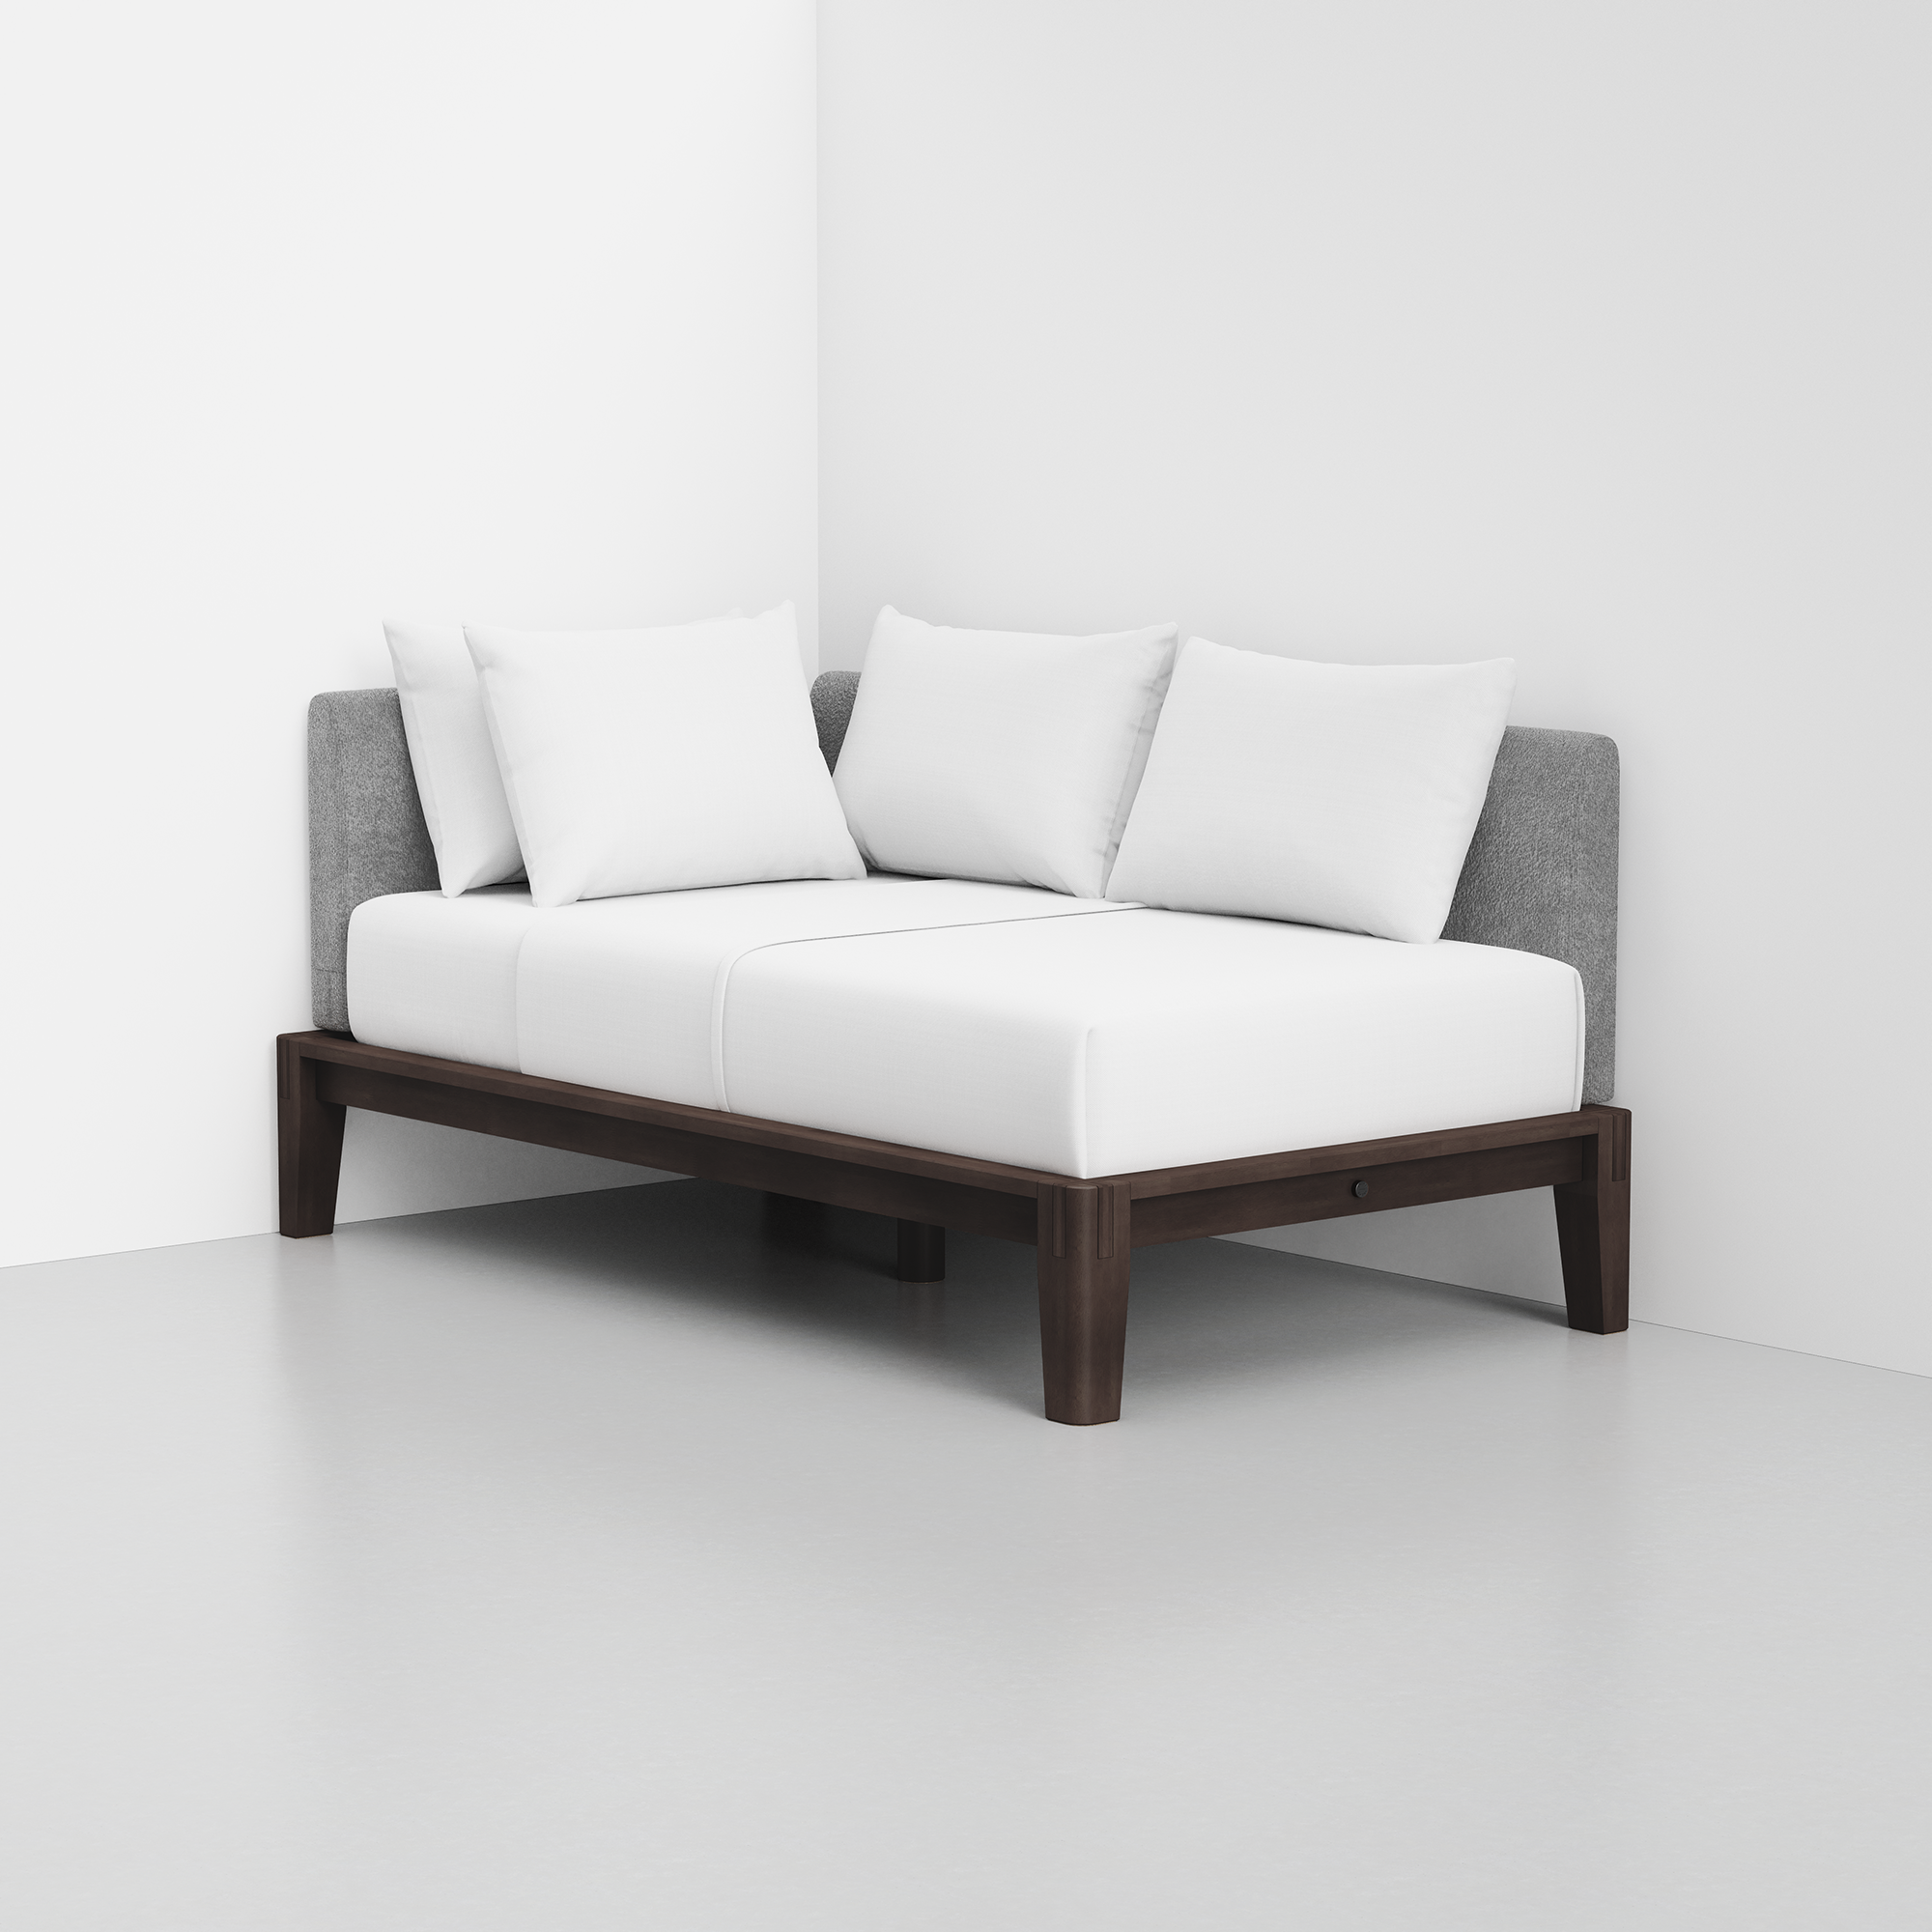 PDP Image: The Daybed (Espresso / Pewter) - Rendering - Pillows